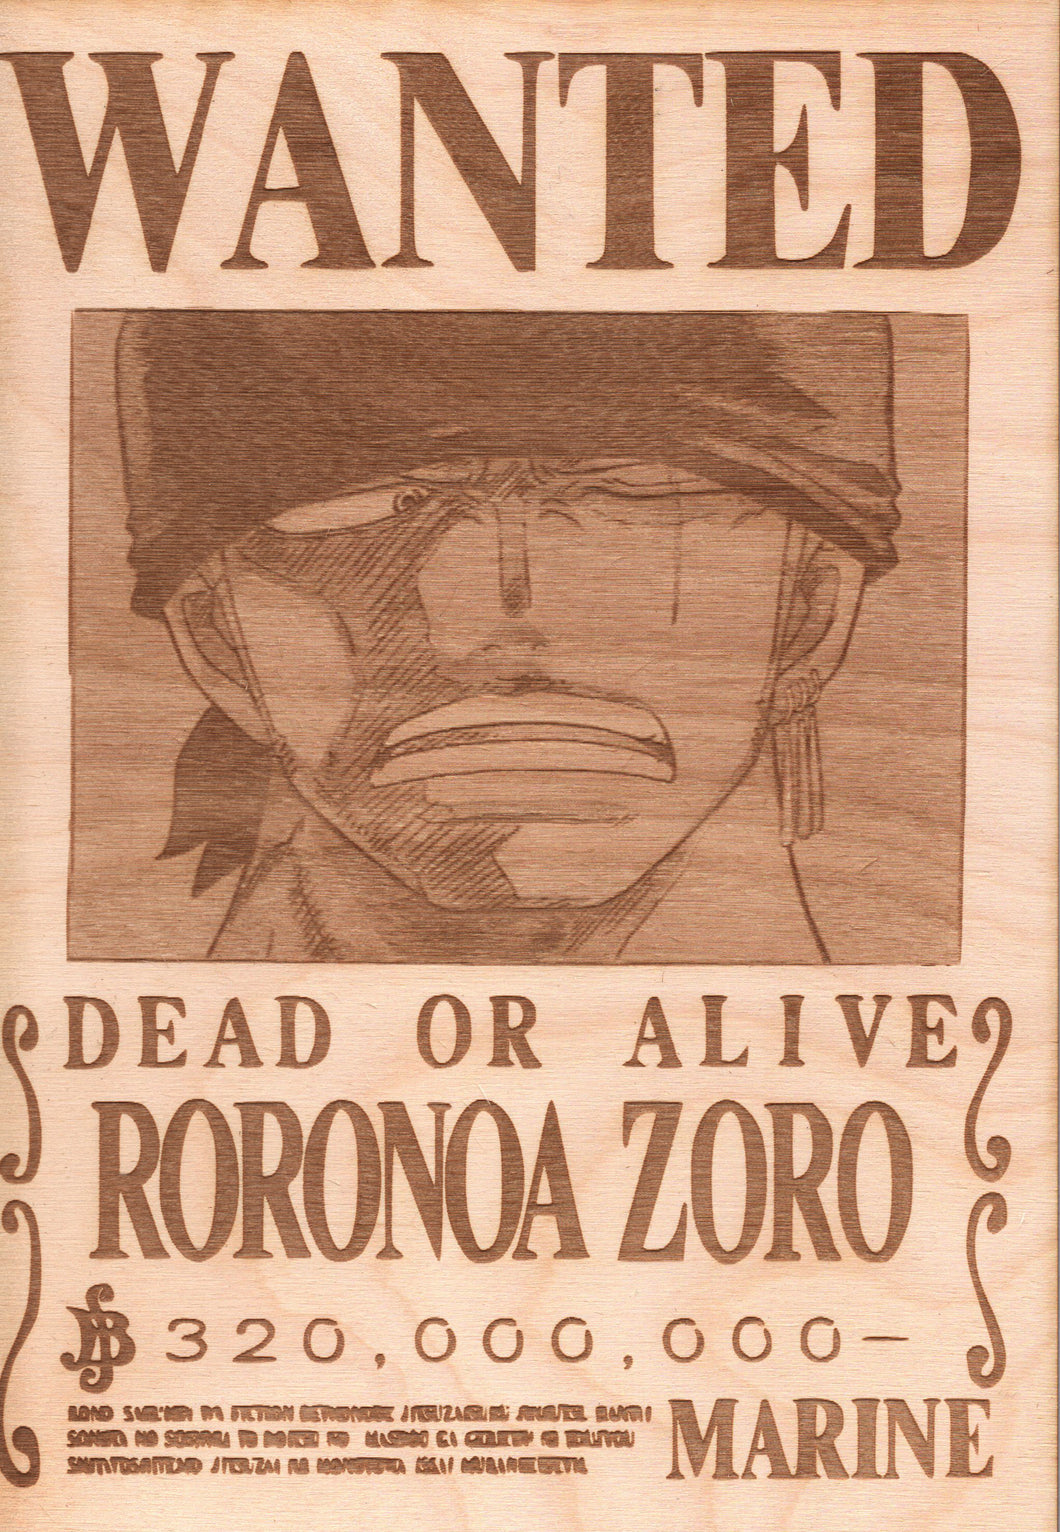 One Piece - Zoro Wooden Wanted Poster - TantrumCollectibles.com